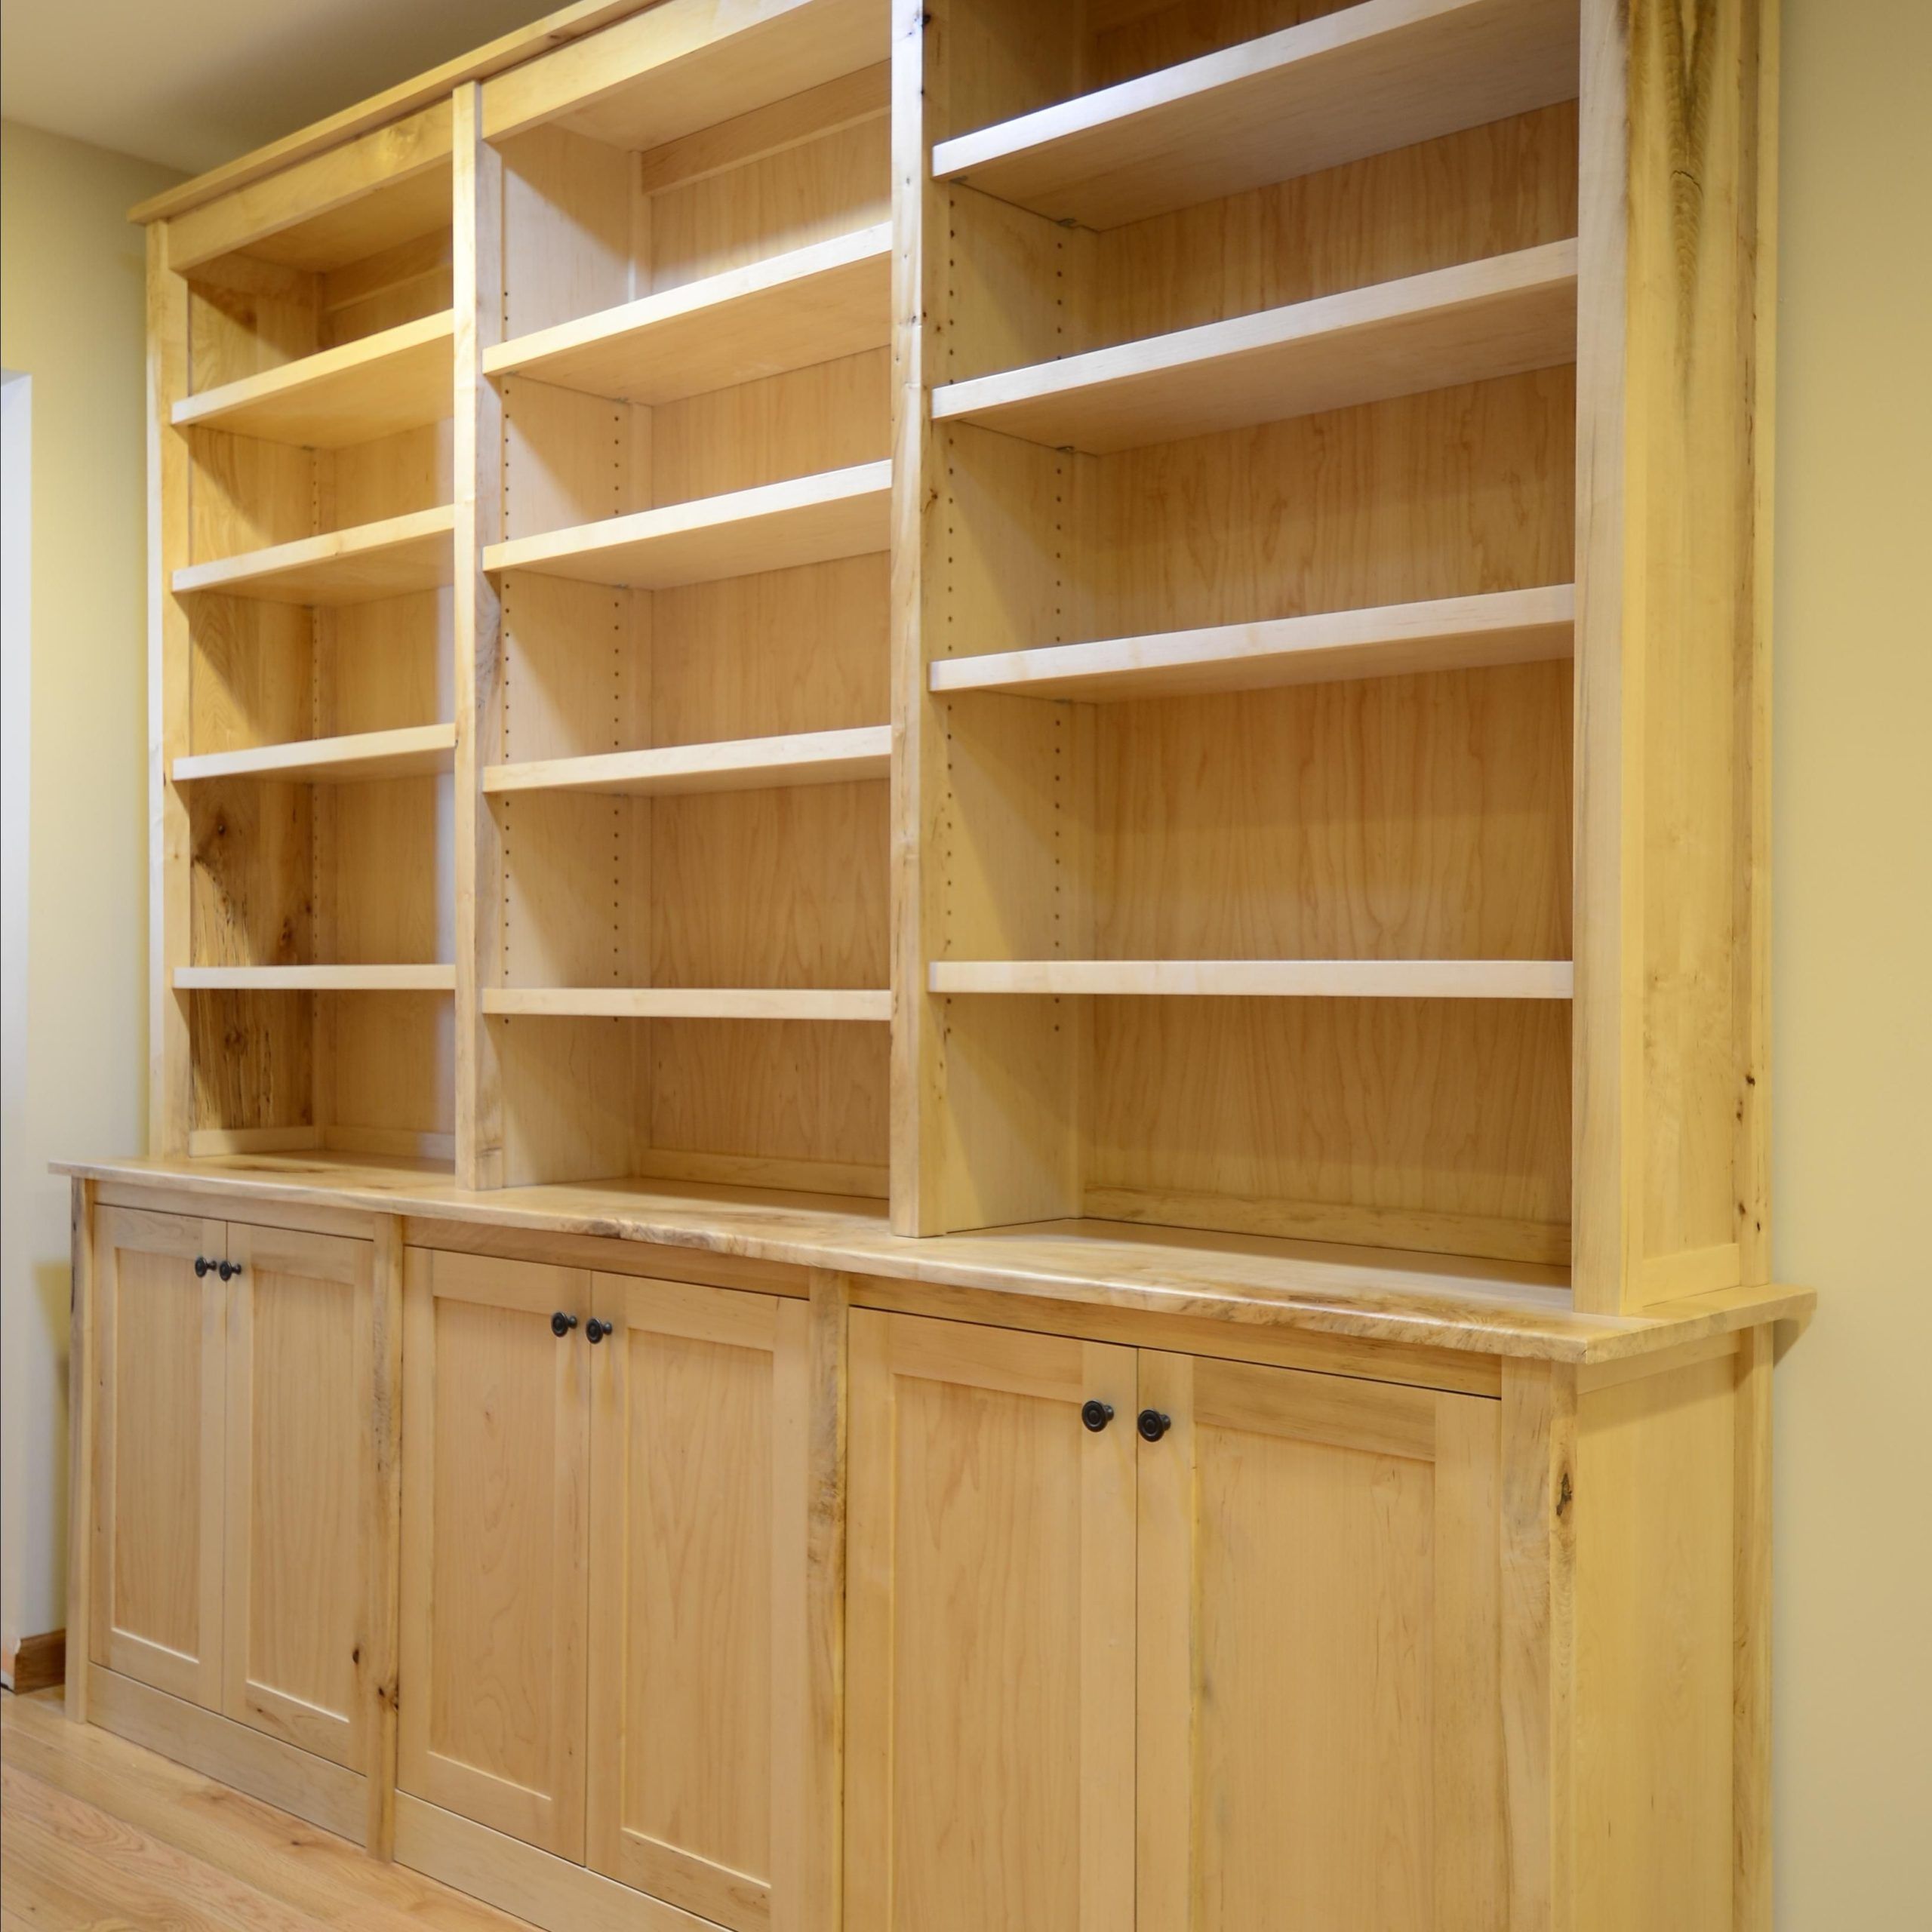 Custom Made Maple Bookcasesjoshua White Fine Furniture And Cabinetry |  Custommade Regarding Natural Handmade Bookcases (View 10 of 15)